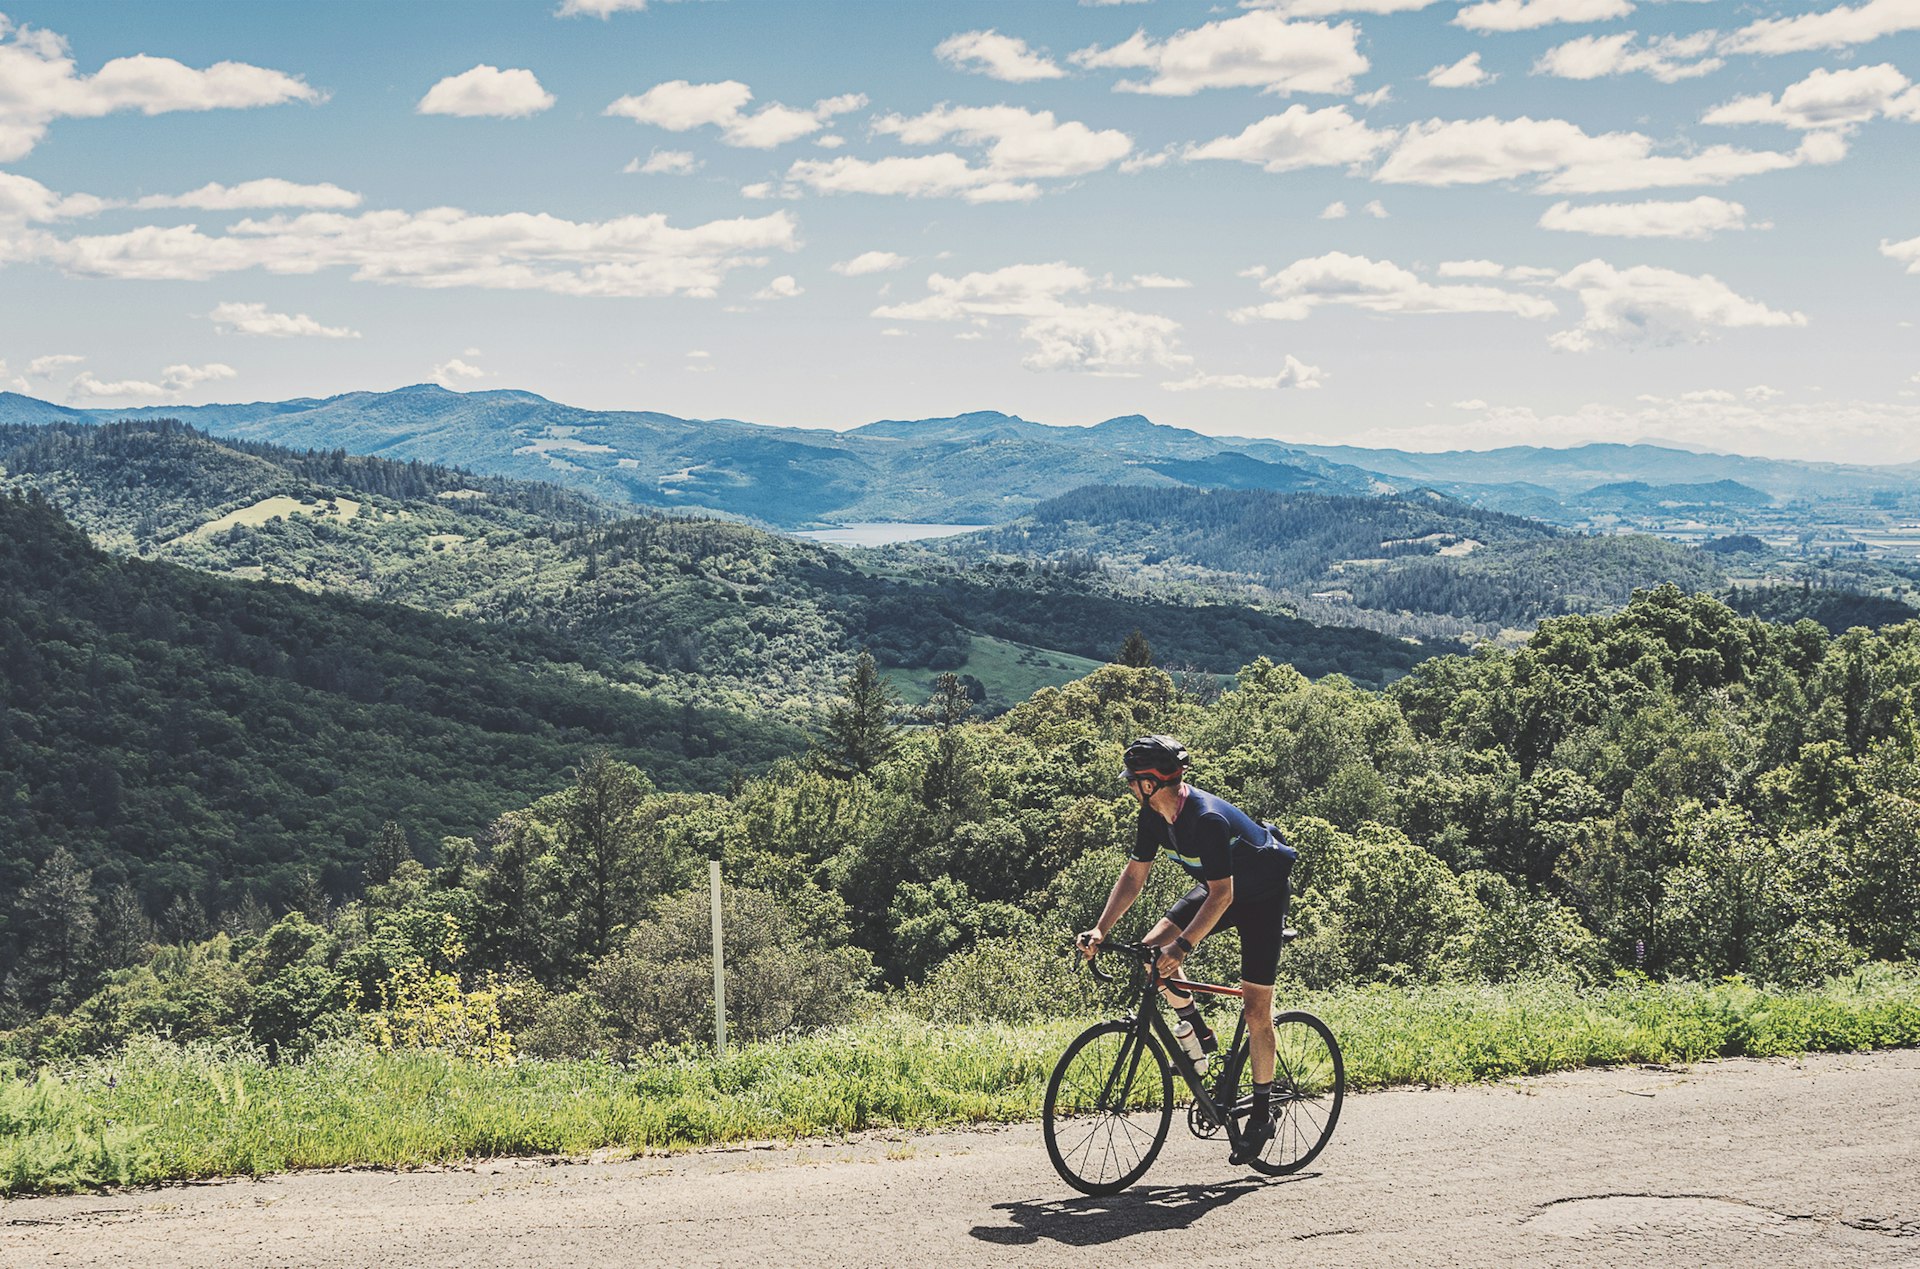 A cyclist pedals up a hill and looks out over the hillside below him on a sunny day